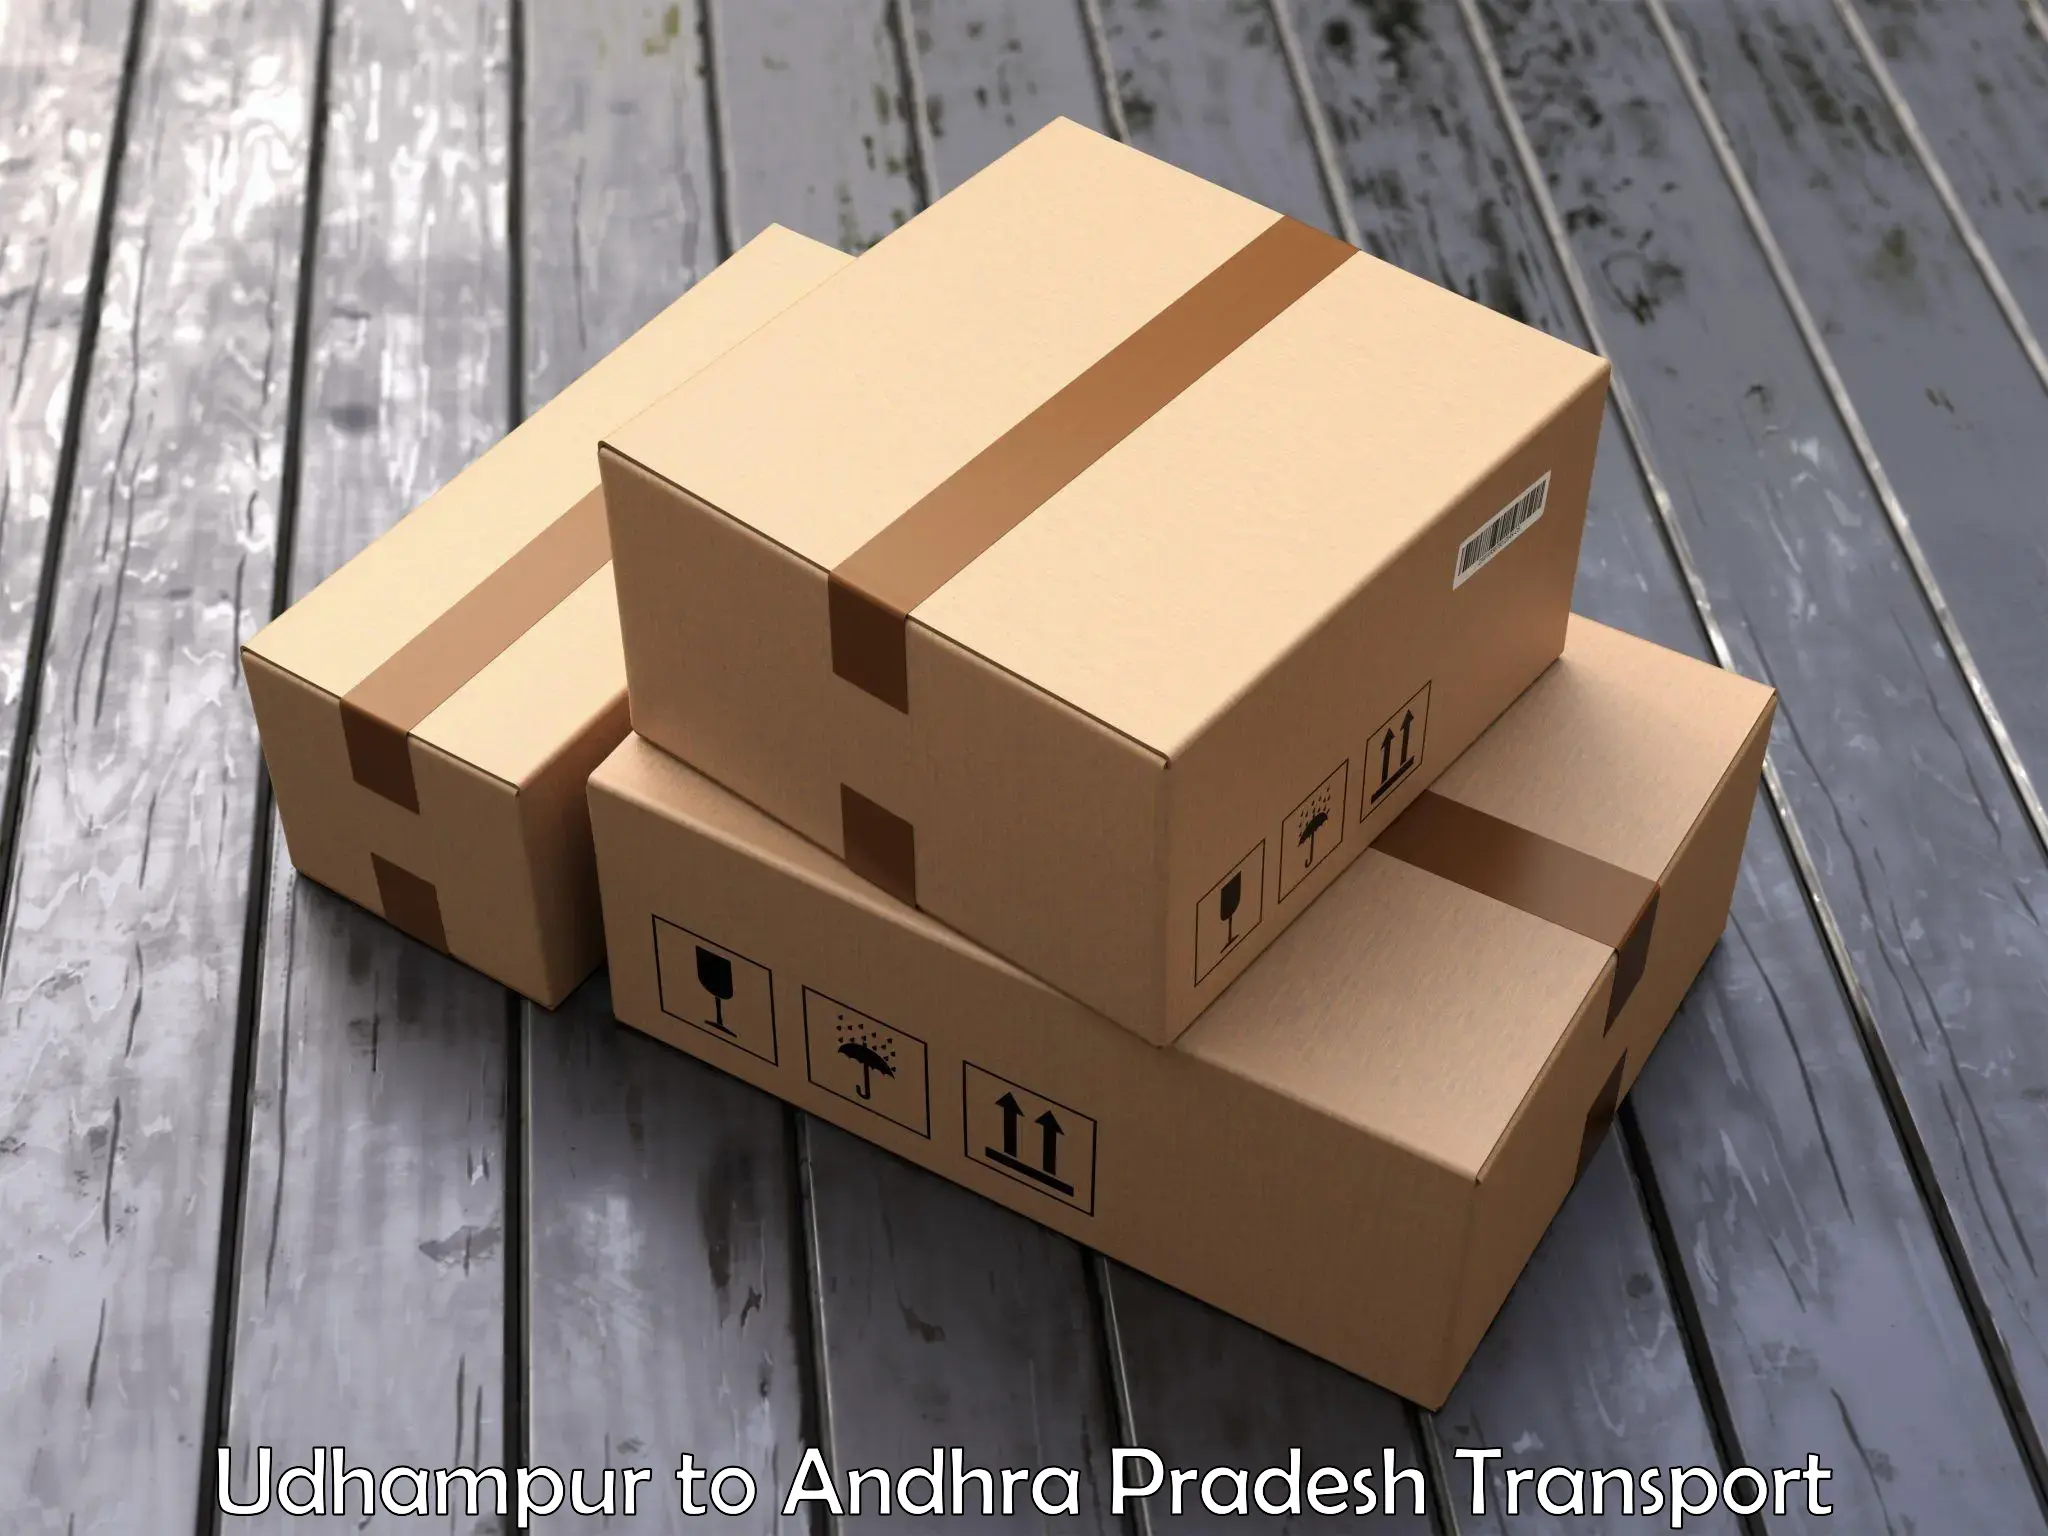 Truck transport companies in India Udhampur to Pulivendula